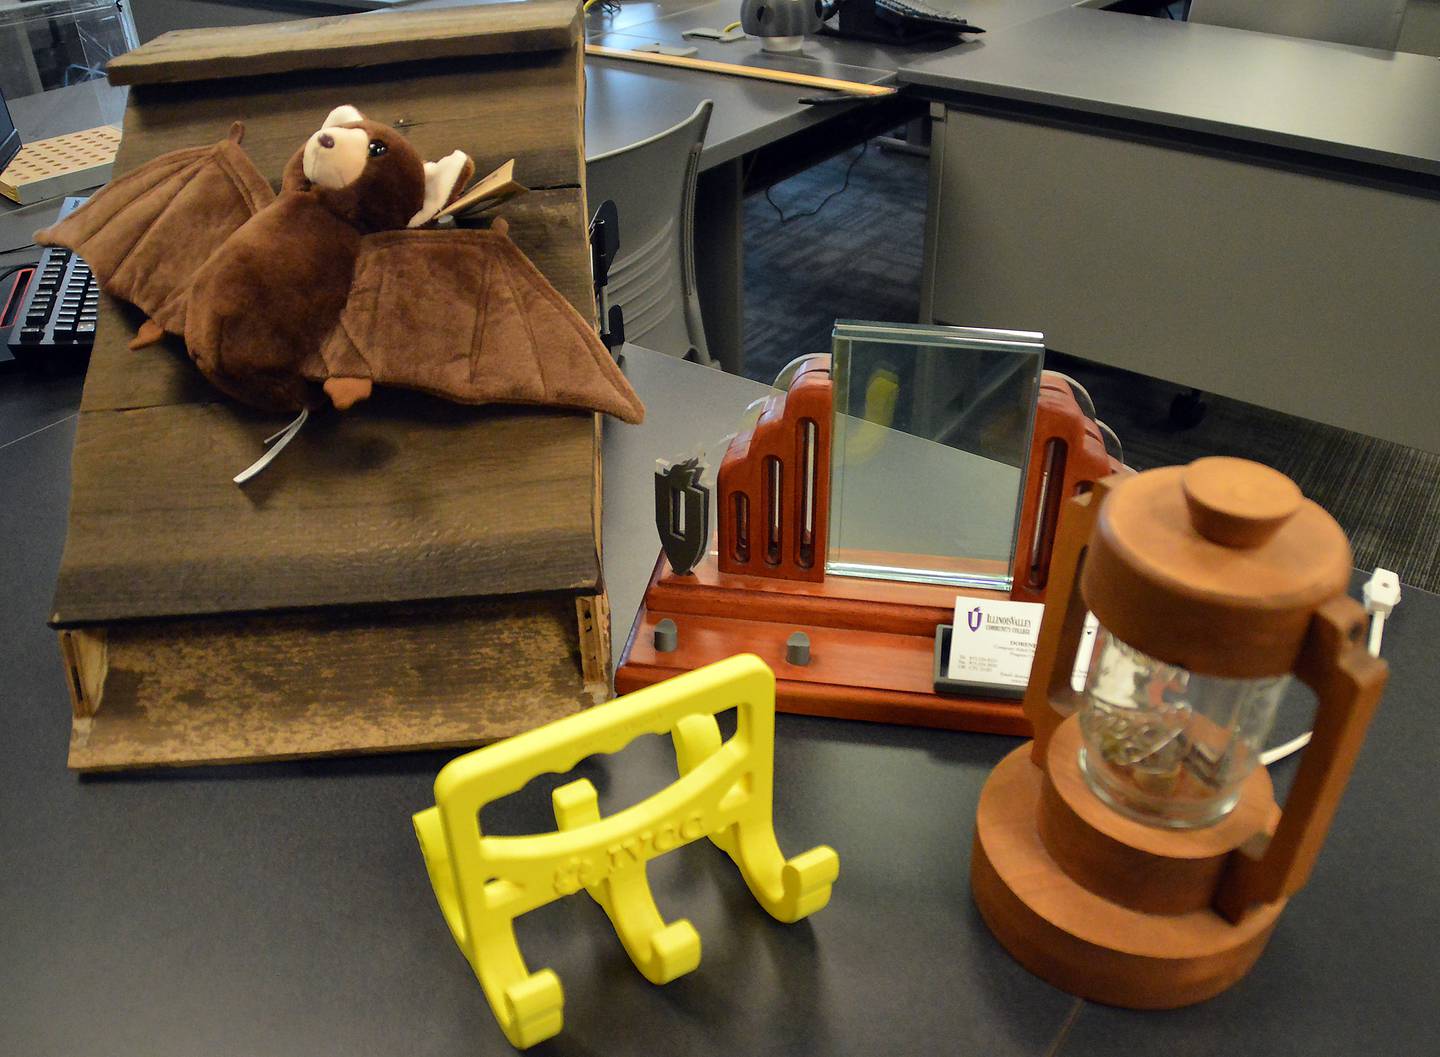 Treasures from the MIMIC archives will be on display next week at Illinois Valley Community College’s MIMIC Fair. New product designs also will debut at the April 17 event which showcases student engineering and design skills.